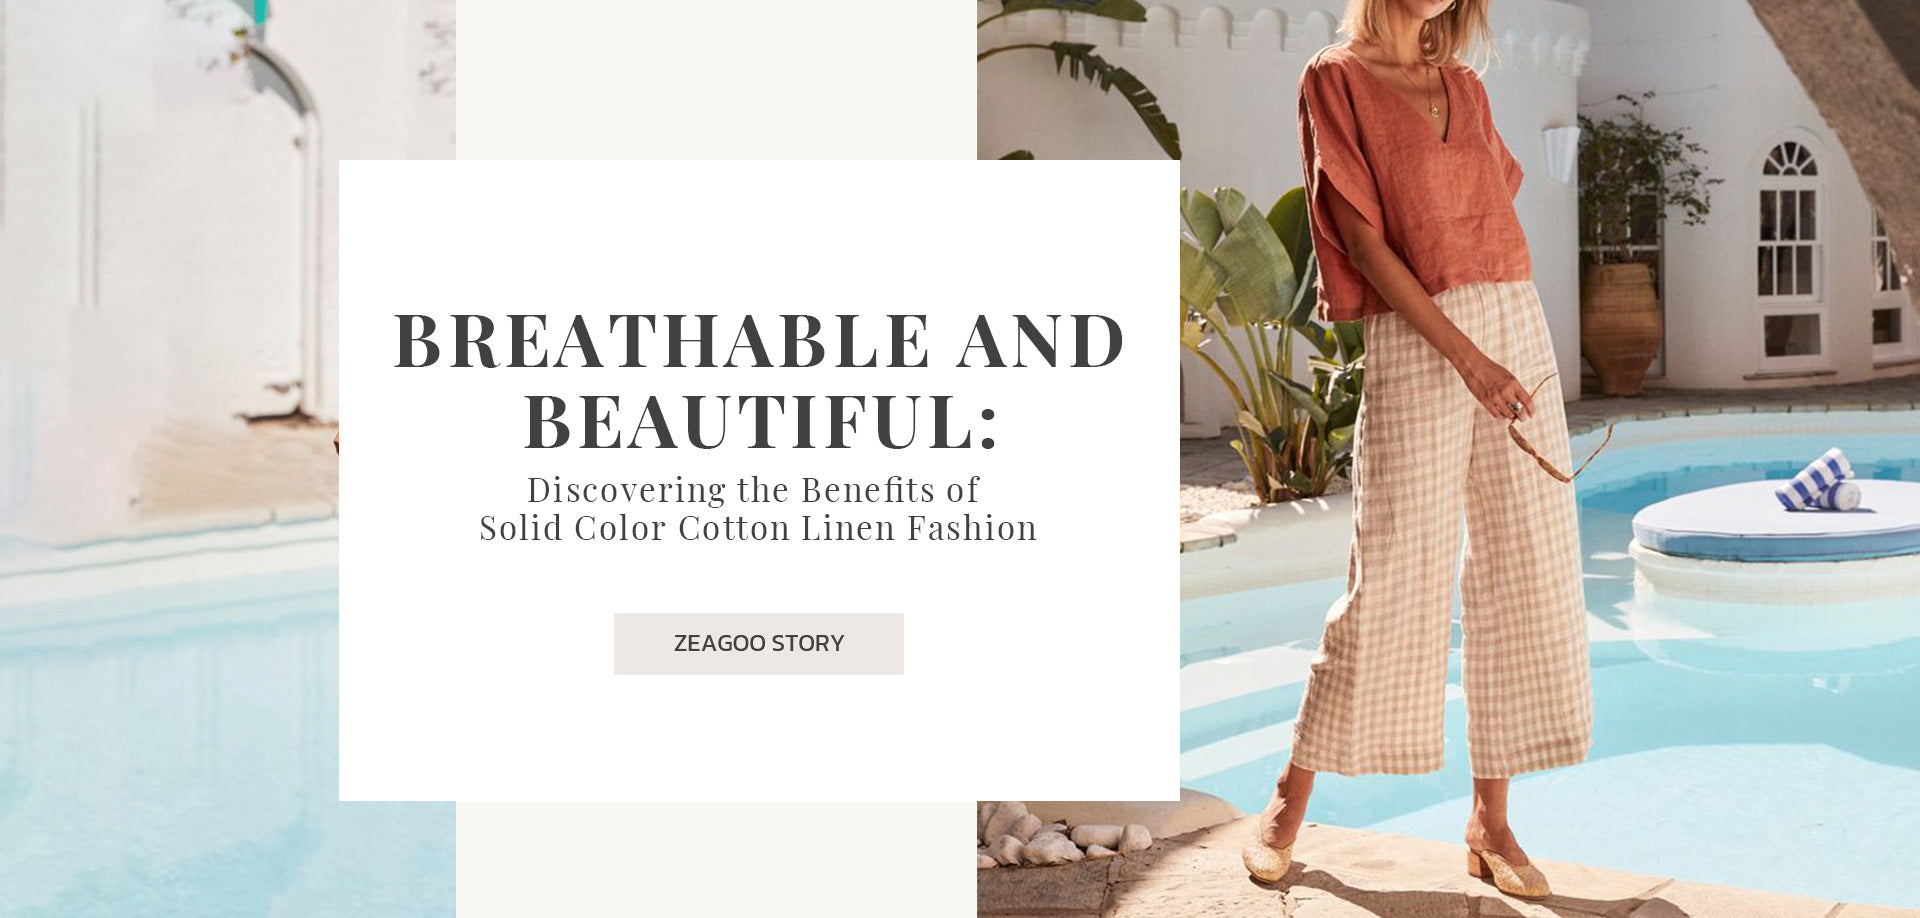 Breathable and Beautiful: Discovering the Benefits of Solid Color Cotton Linen Fashion